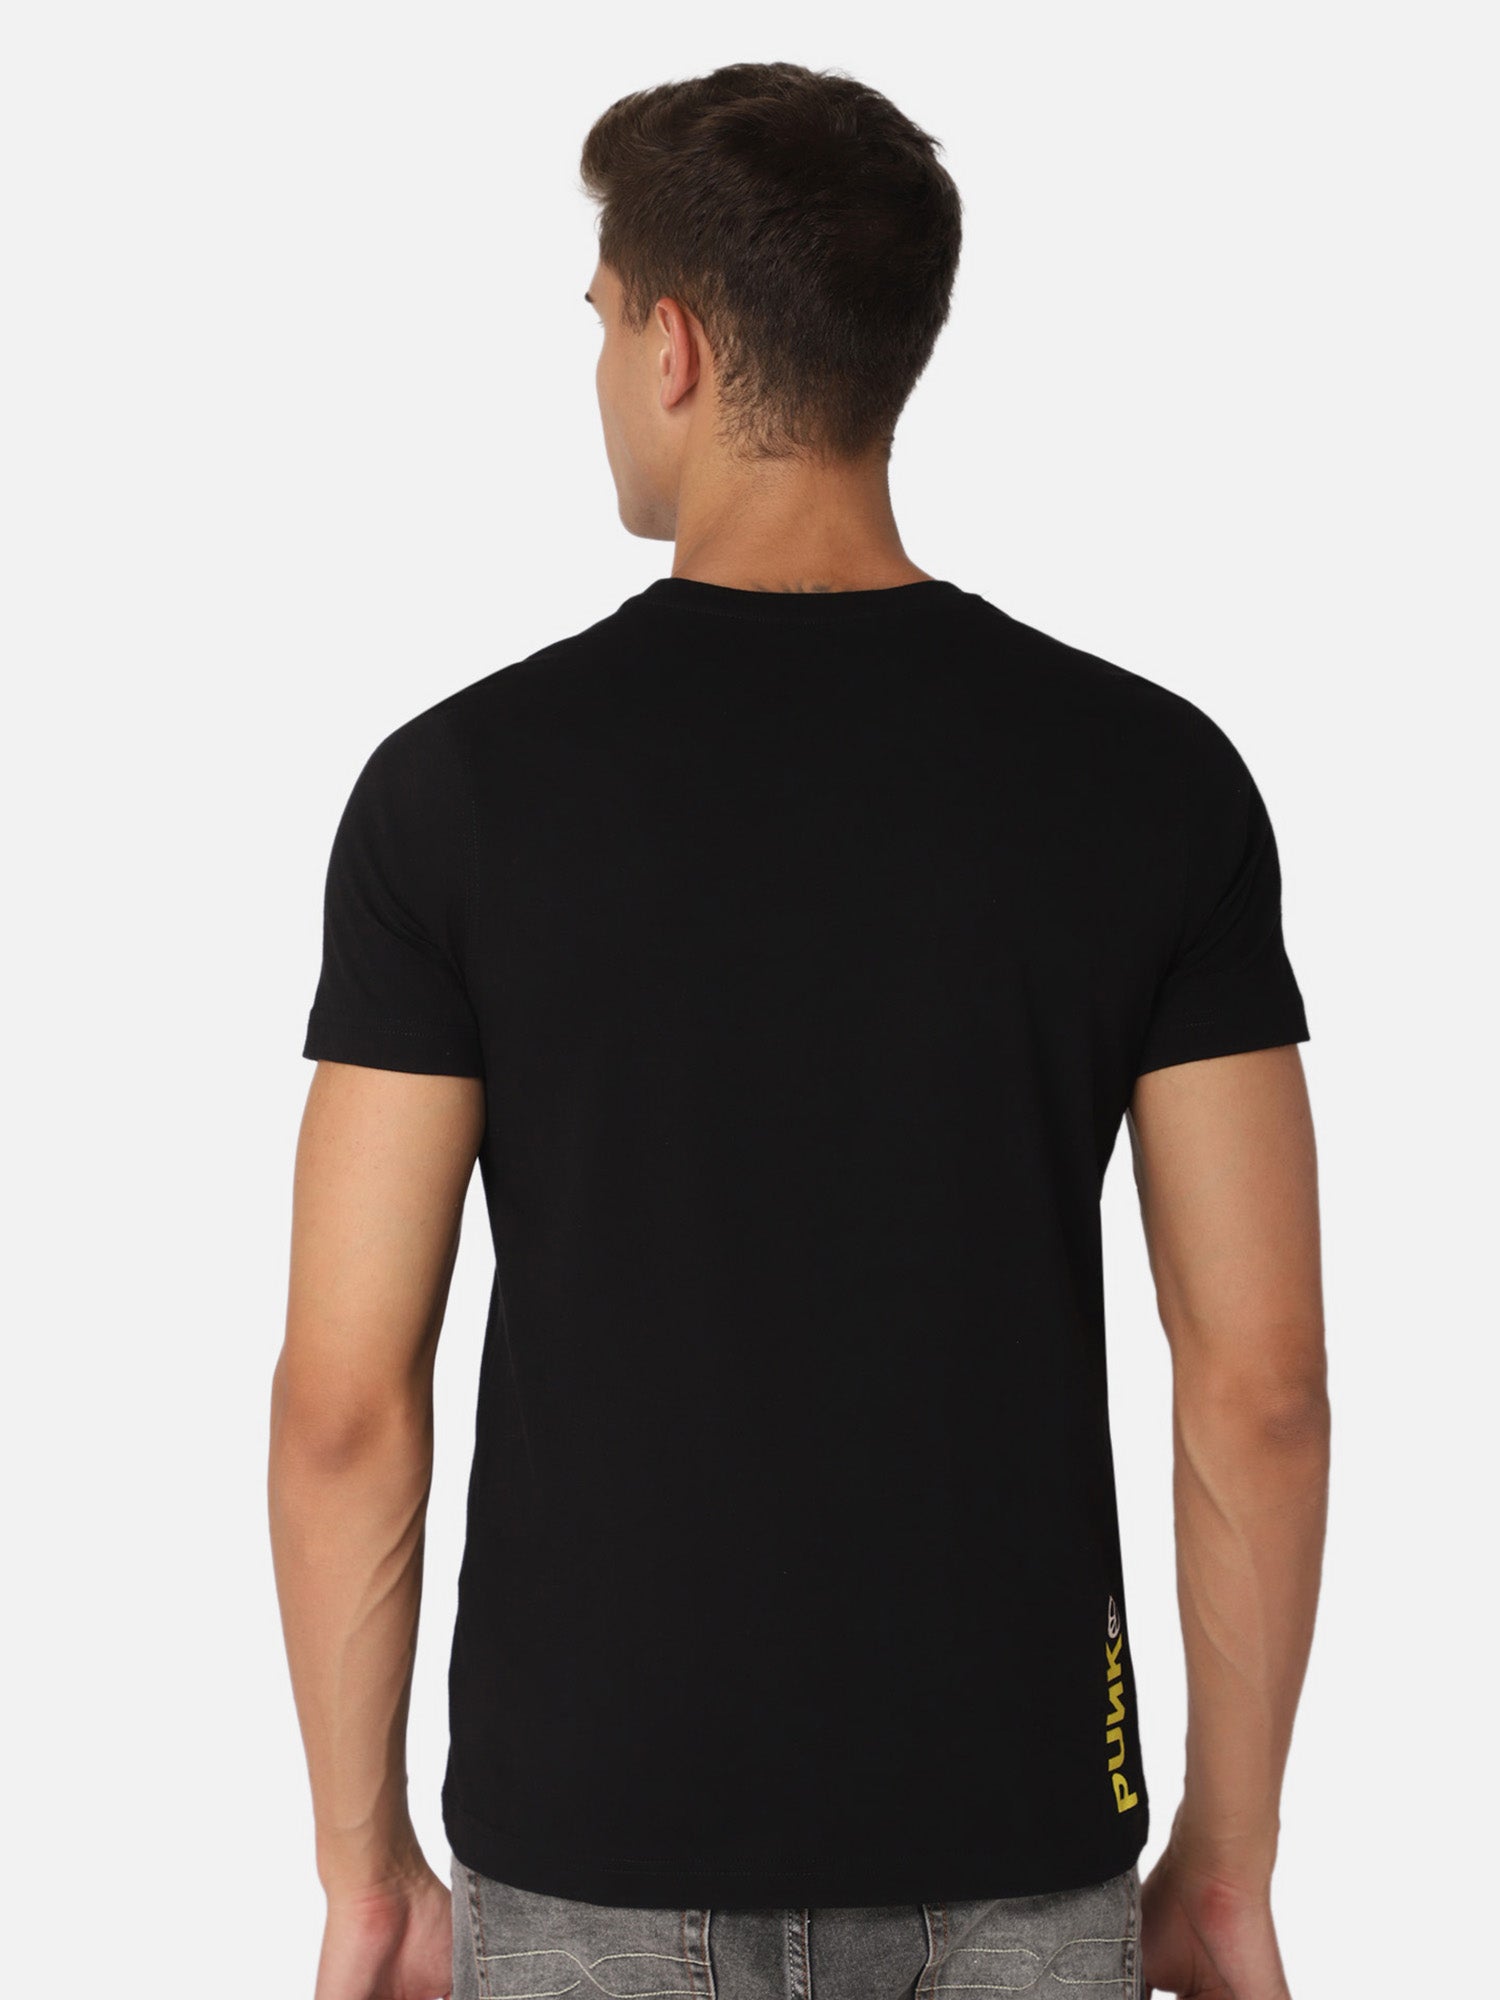 Punk SPINNING-THE-SPACE Black Tshirt